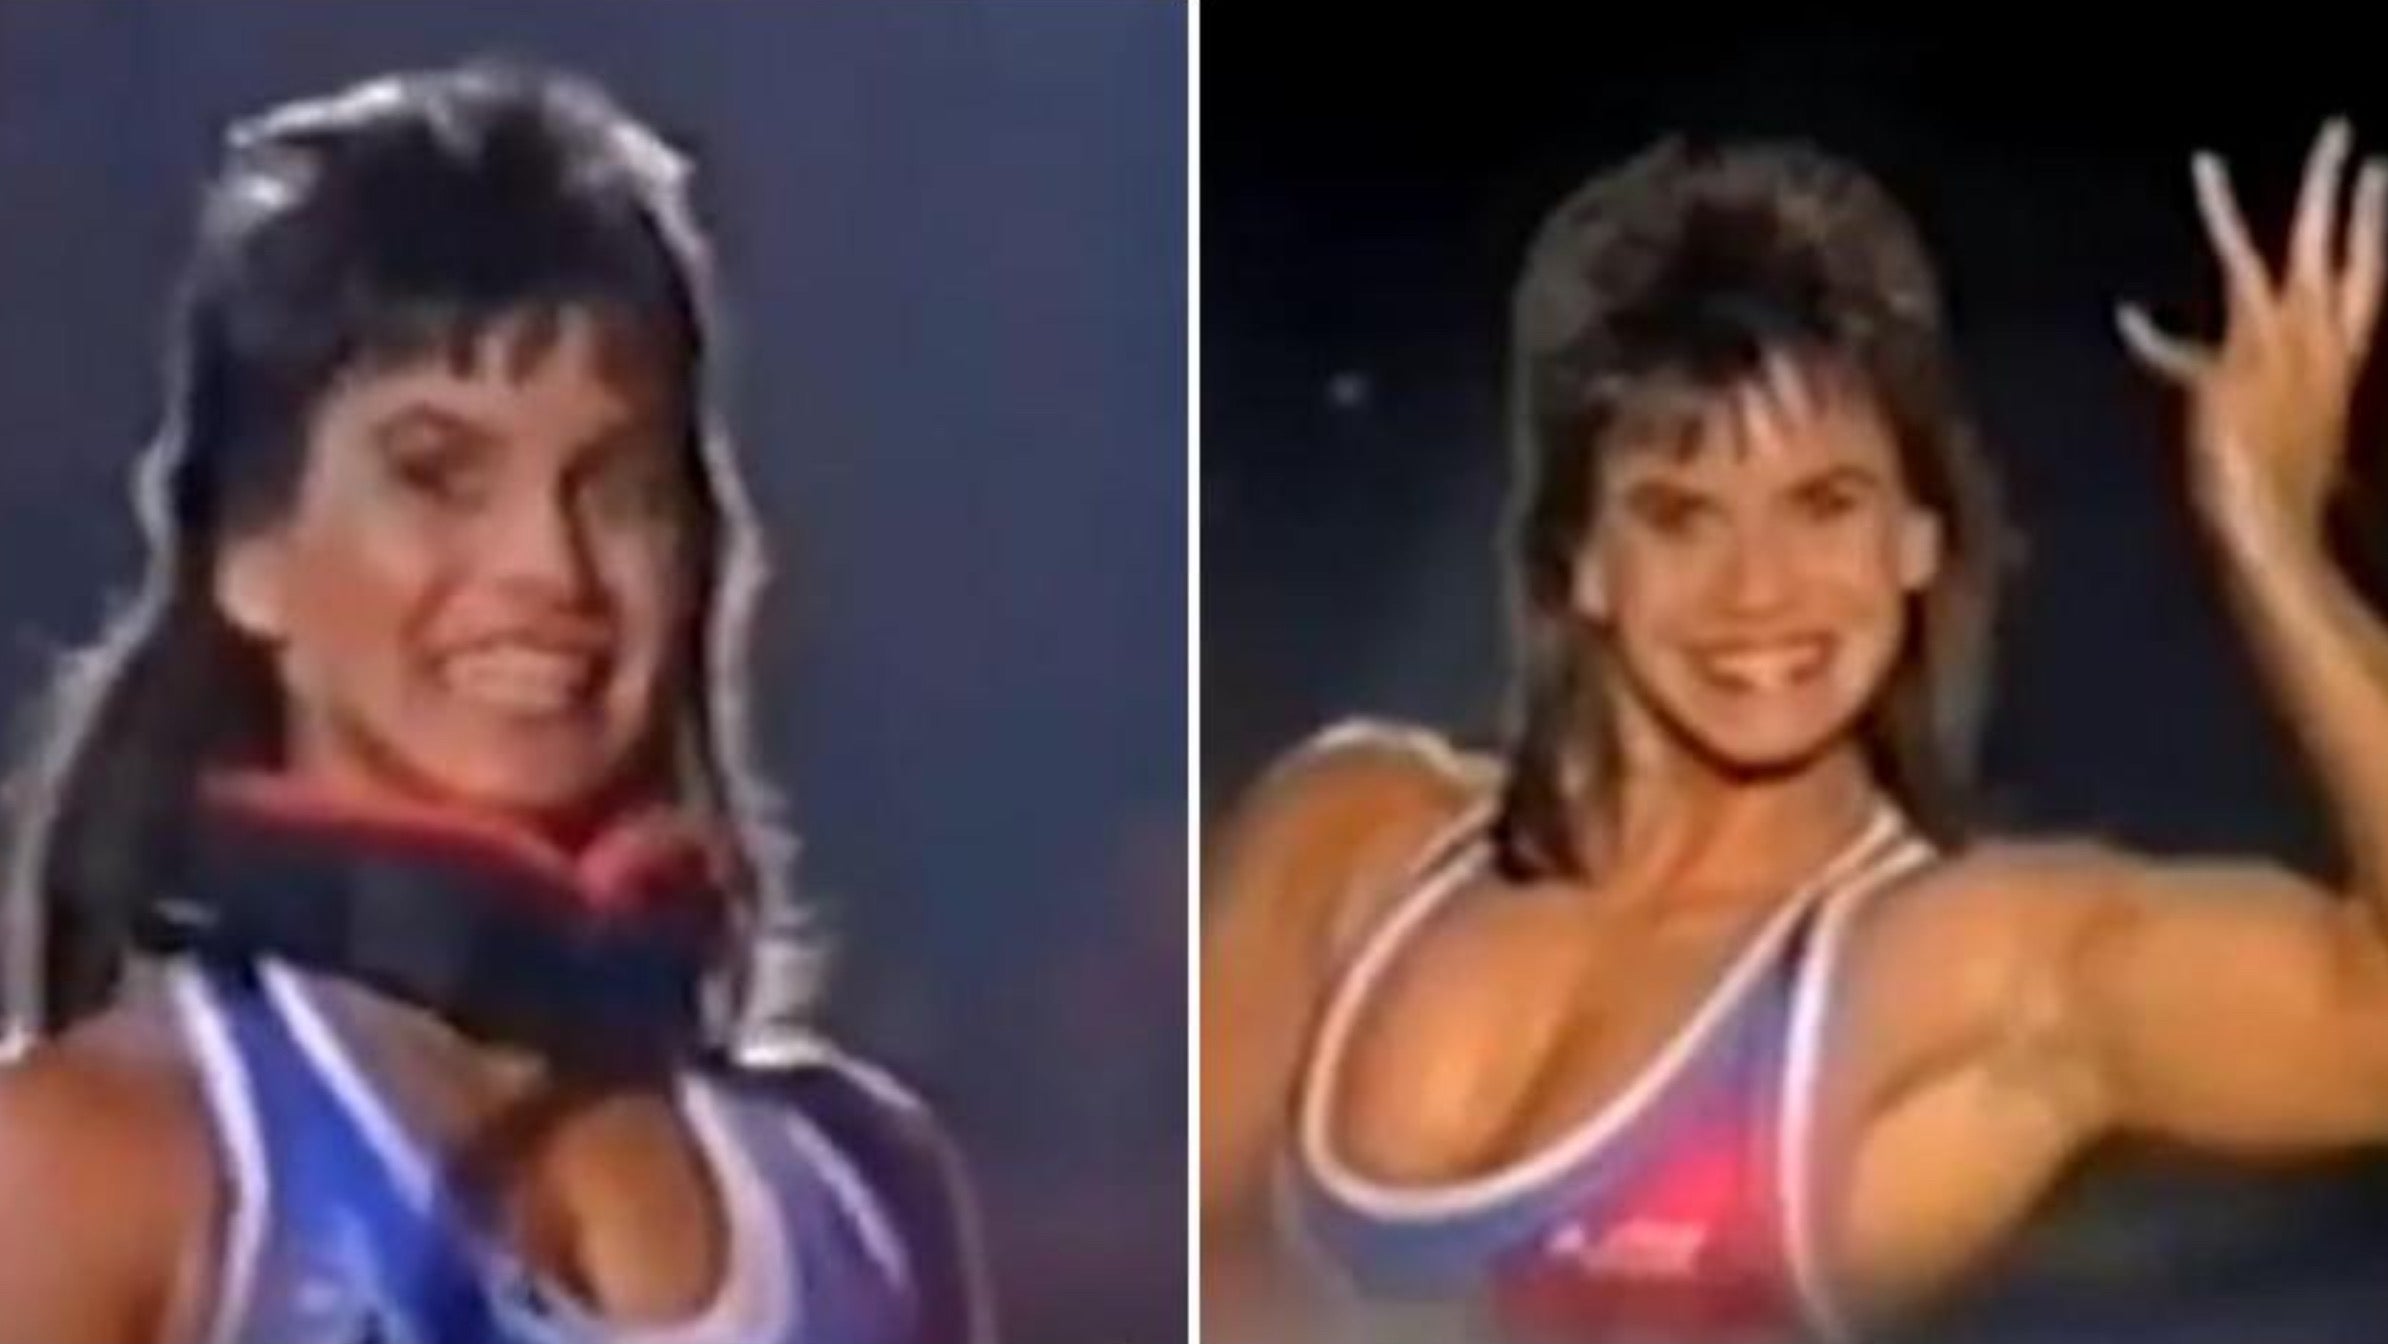 Gladiators star Bernadette Hunt, aka Falcon, died of cancer at age 59, Magnate Daily